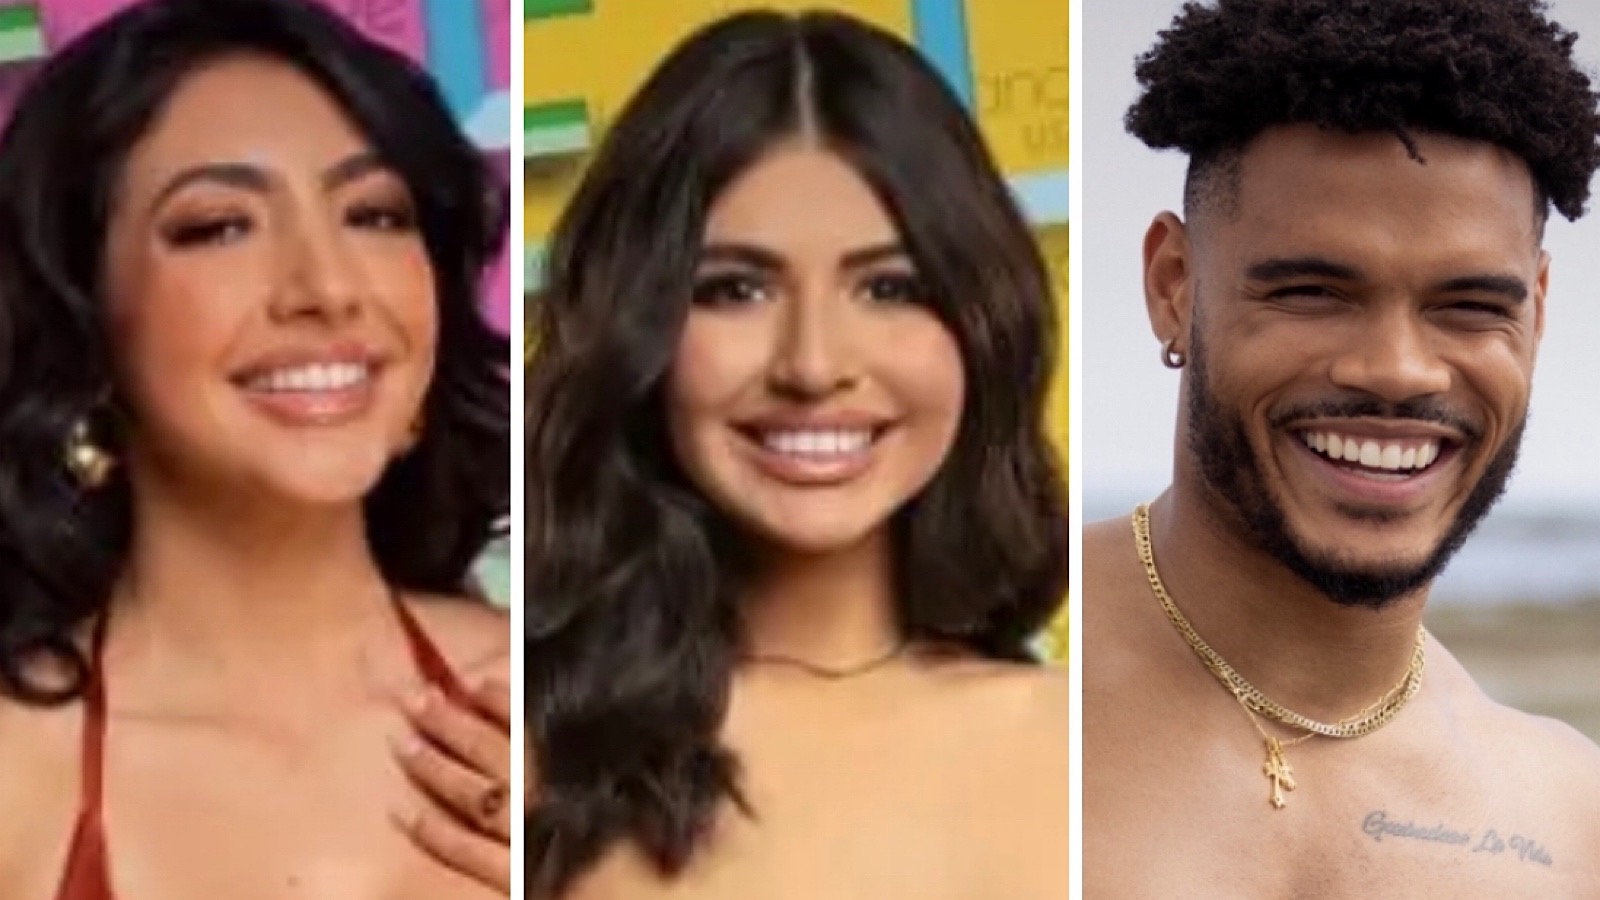 Love Island USA’s wildest Episode ends with Kassy dumping Leo for